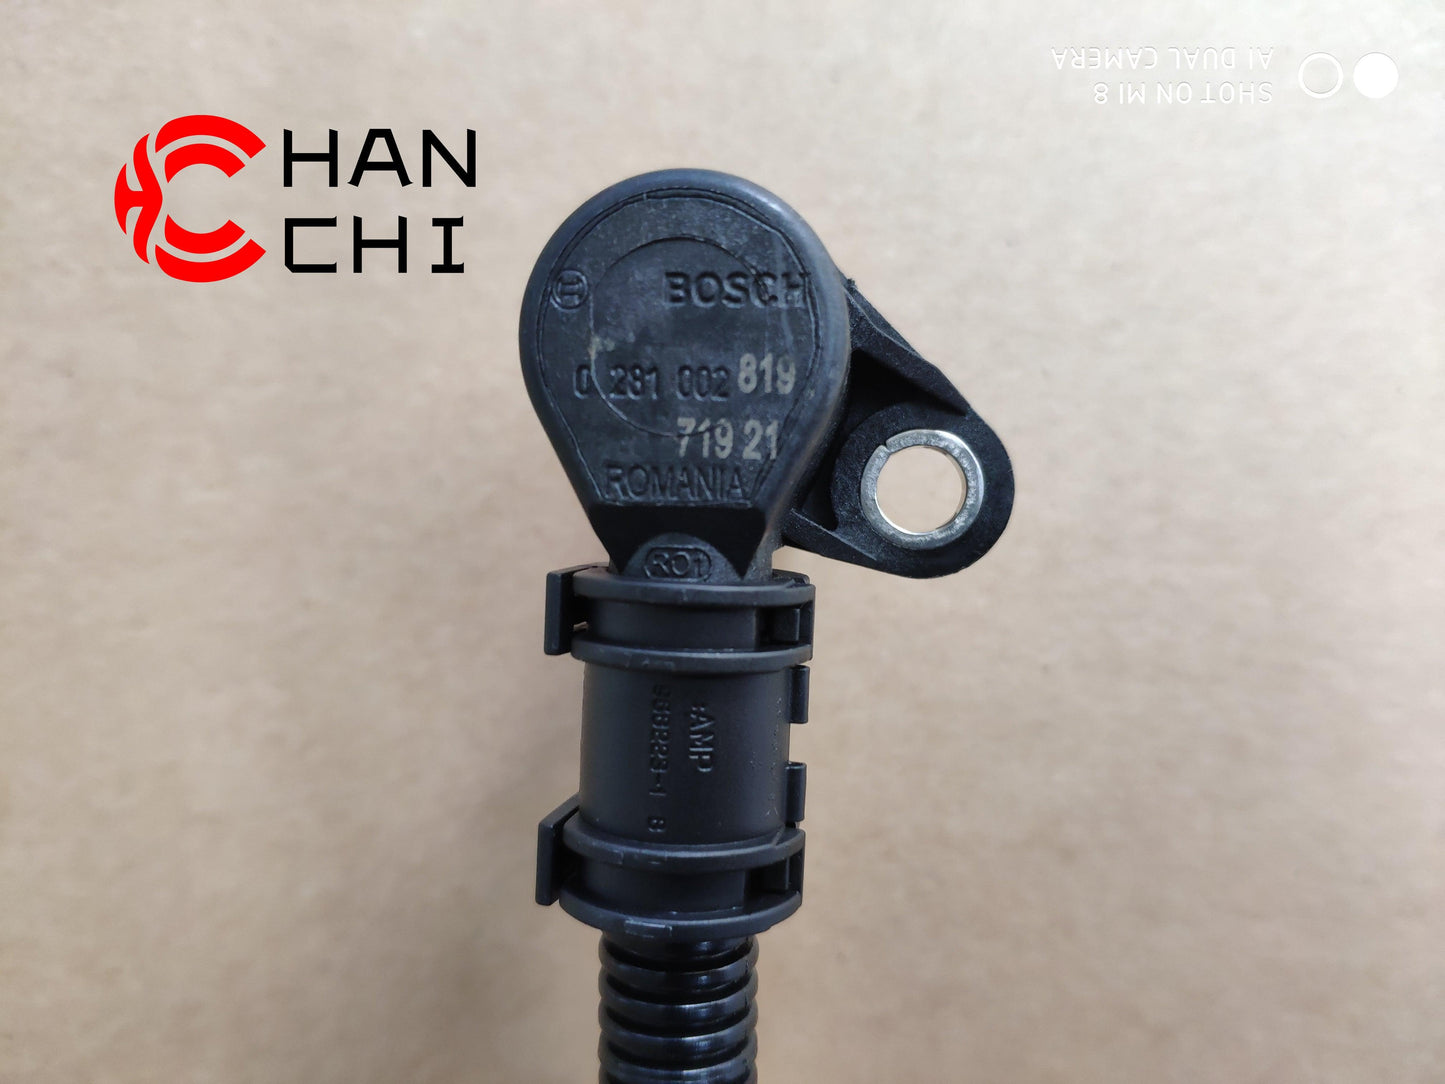 【Description】---☀Welcome to HANCHI☀---✔Good Quality✔Generally Applicability✔Competitive PriceEnjoy your shopping time↖（^ω^）↗【Features】Brand-New with High Quality for the Aftermarket.Totally mathced your need.**Stable Quality**High Precision**Easy Installation**【Specification】OEM：0281002819 961200670014Material：ABSColor：blackOrigin：Made in ChinaWeight：100g【Packing List】1* Crankshaft Position Sensor 【More Service】 We can provide OEM service We can Be your one-step solution for Auto Parts We can pr